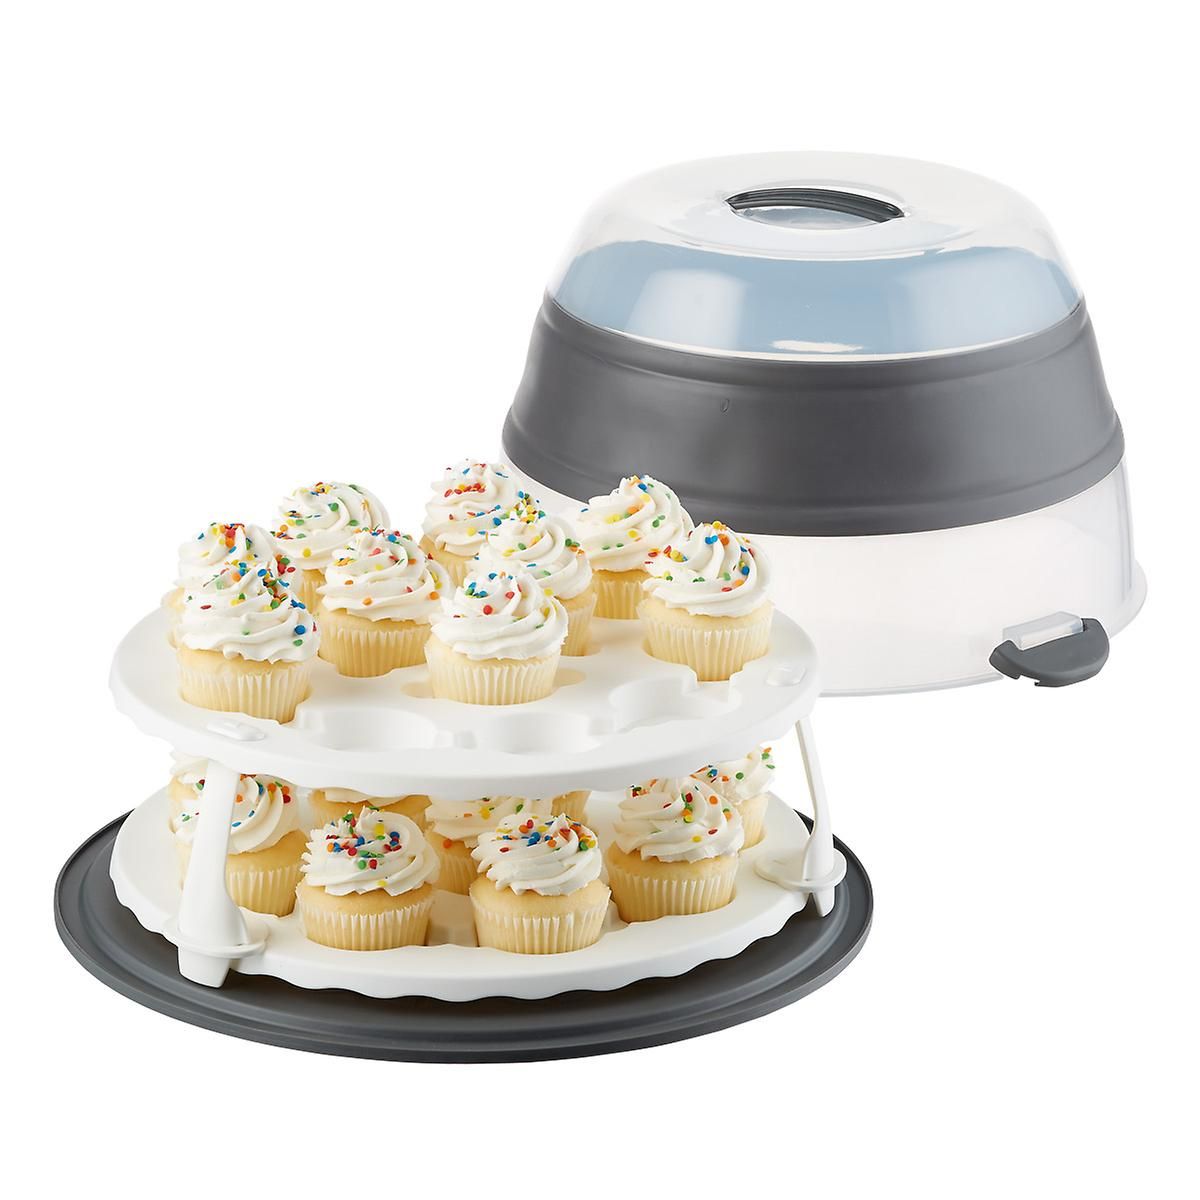 Celebrate National Cake Decorating Day with these baking items